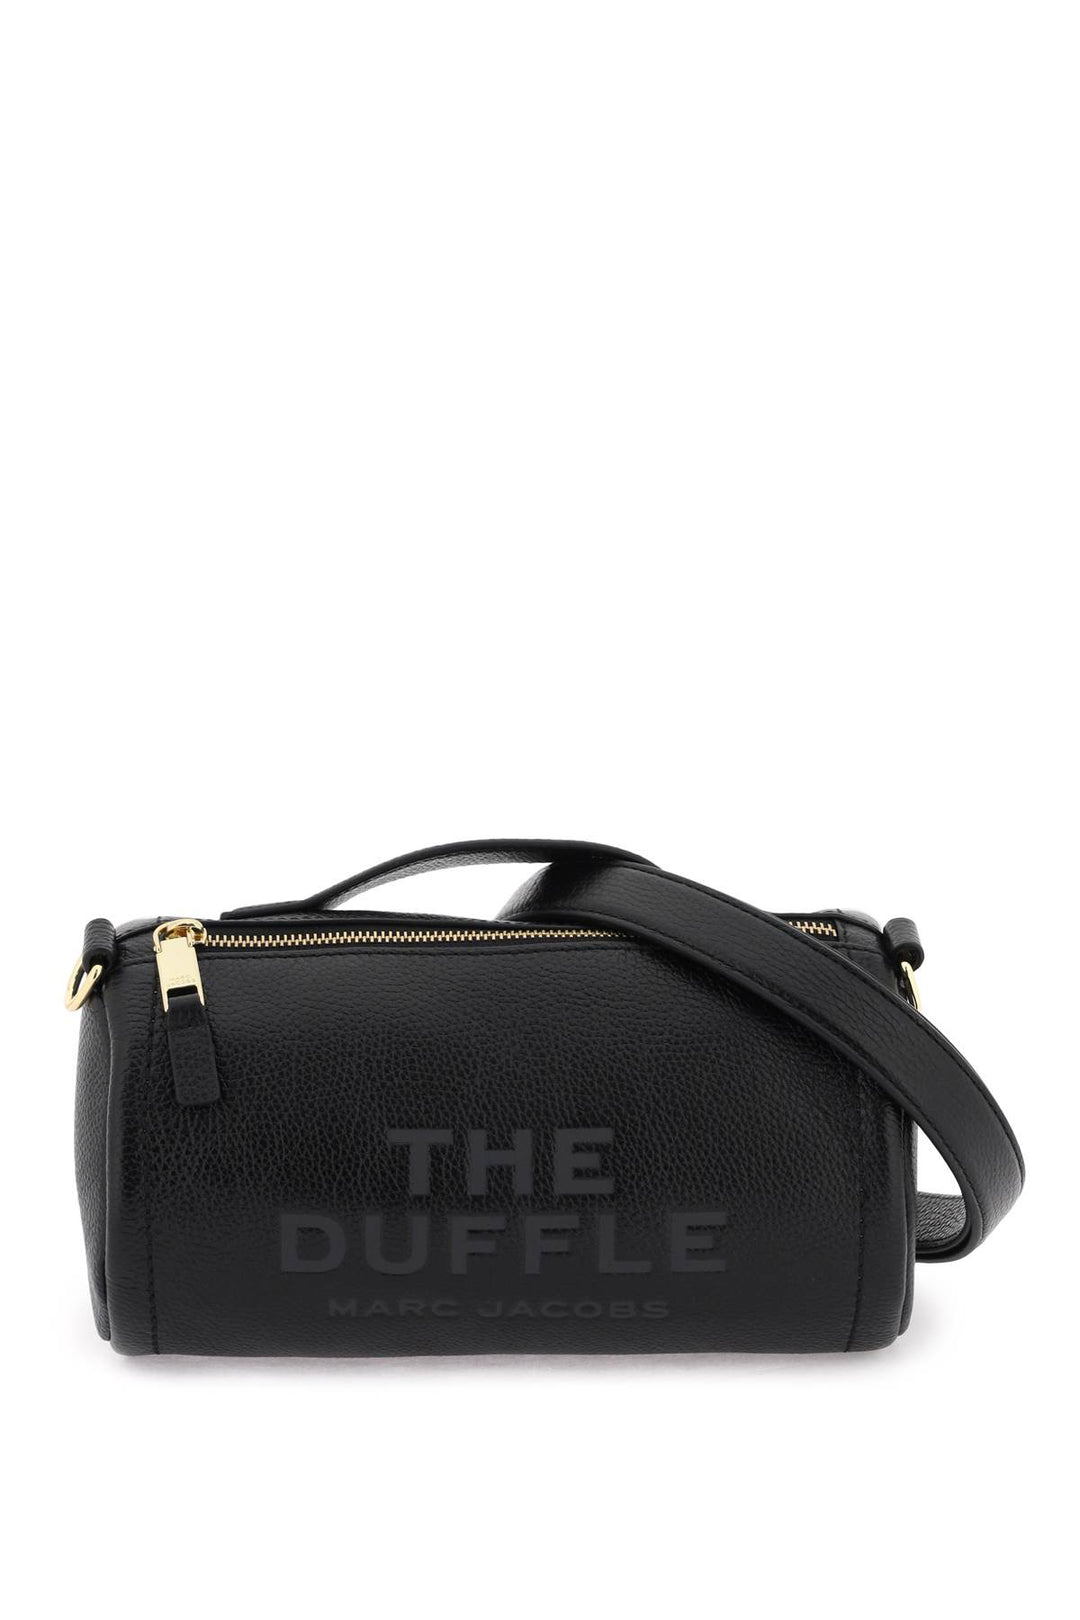 Marc Jacobs The Leather Duffle Bag   Black